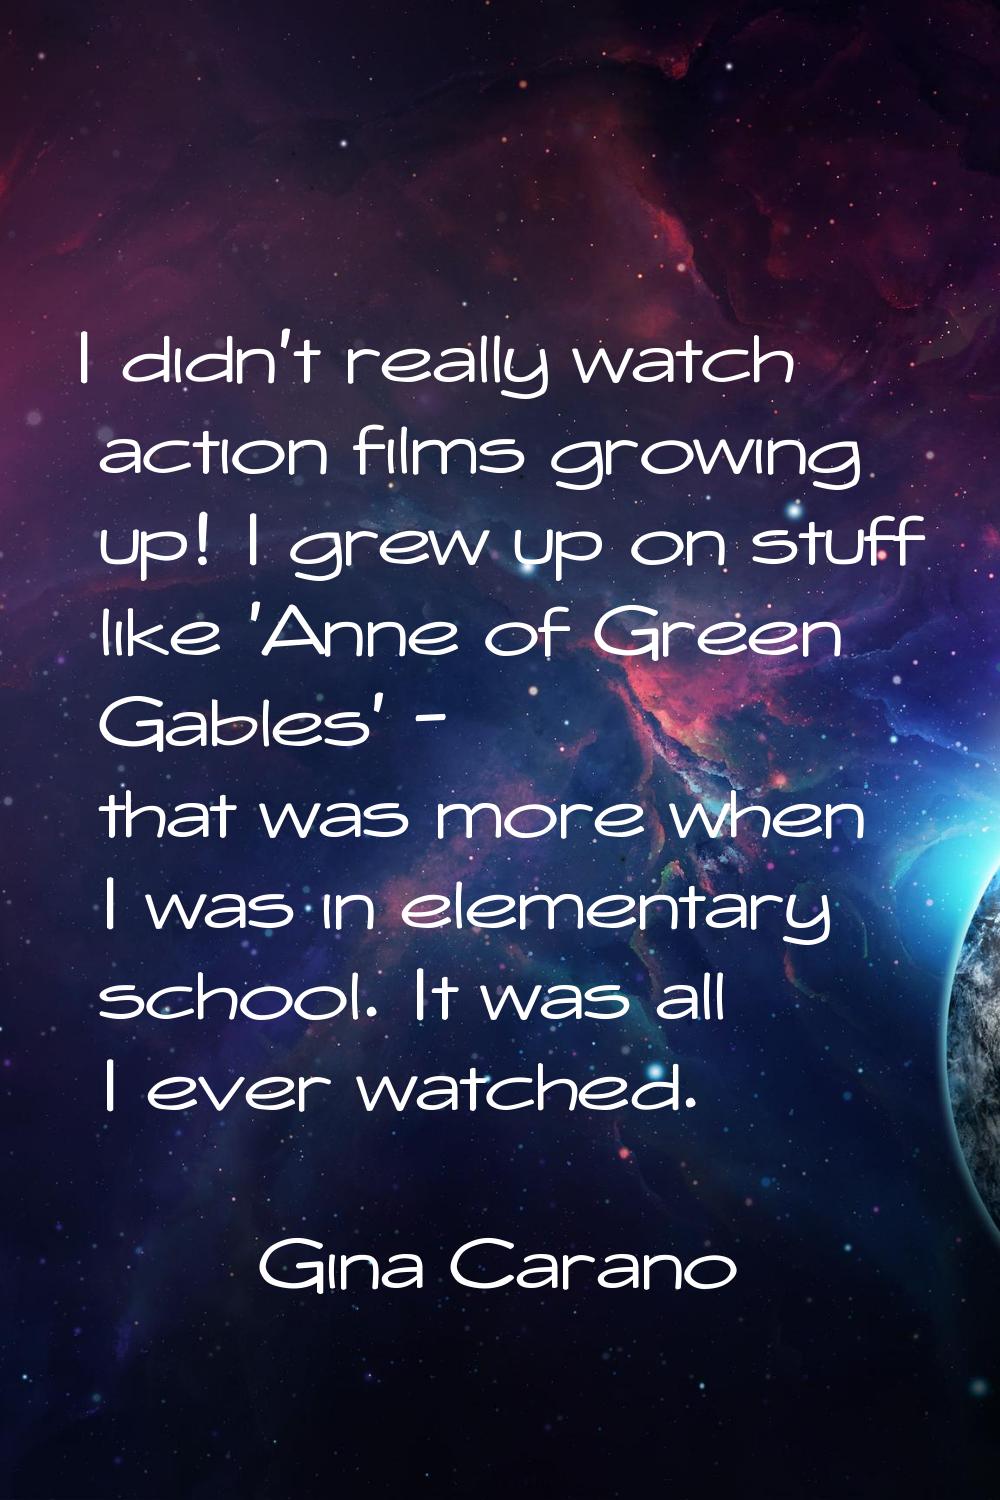 I didn't really watch action films growing up! I grew up on stuff like 'Anne of Green Gables' - tha